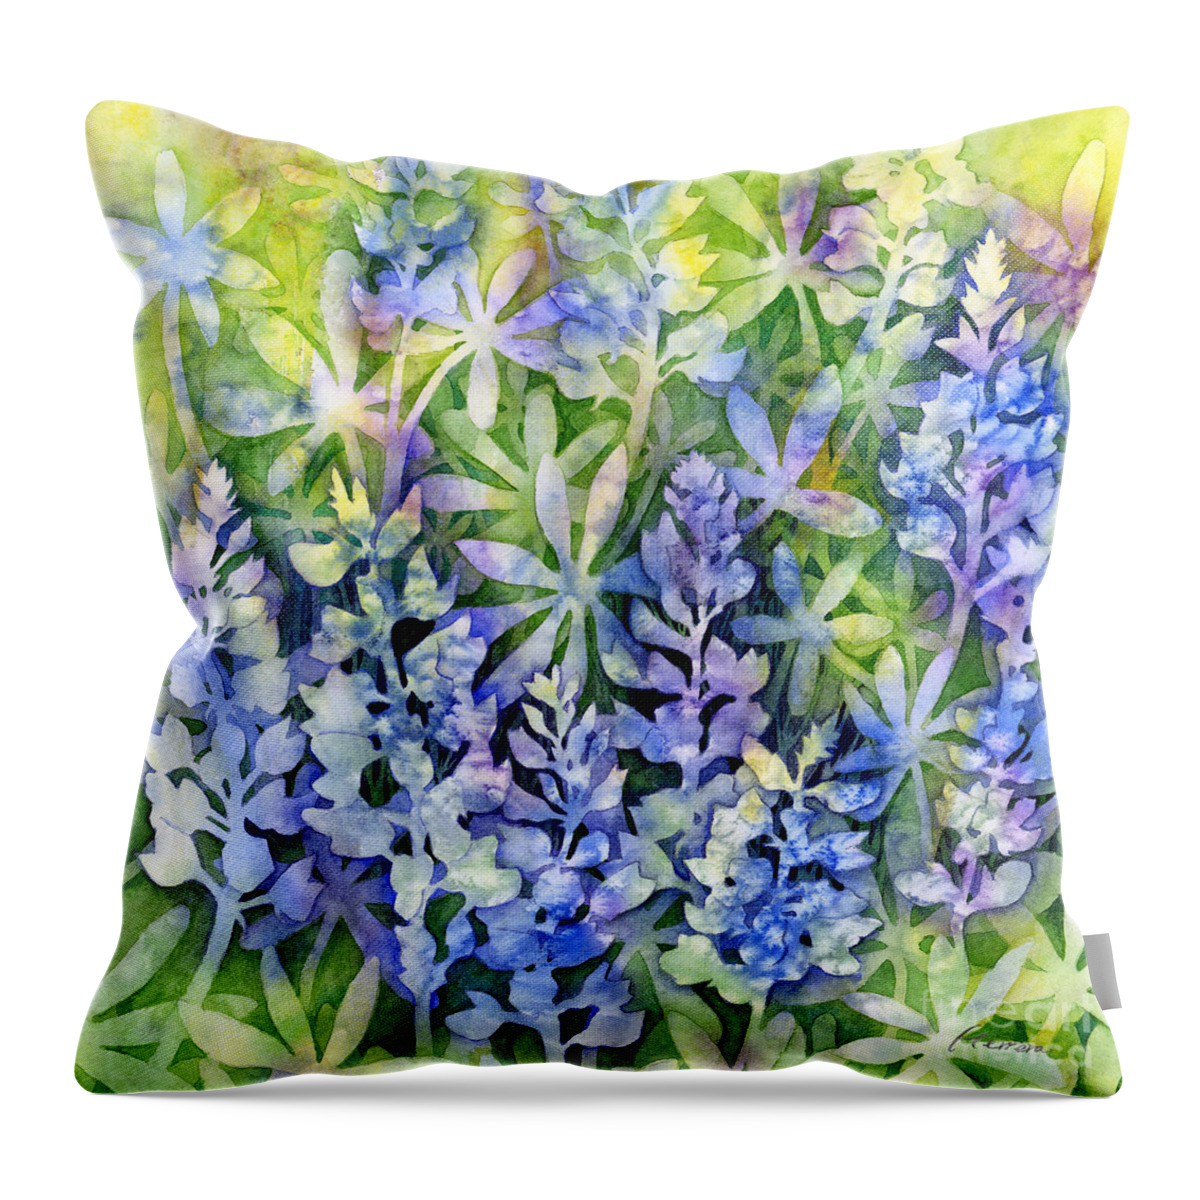 Texas Throw Pillow featuring the painting Texas Blues - Bluebonnets by Hailey E Herrera